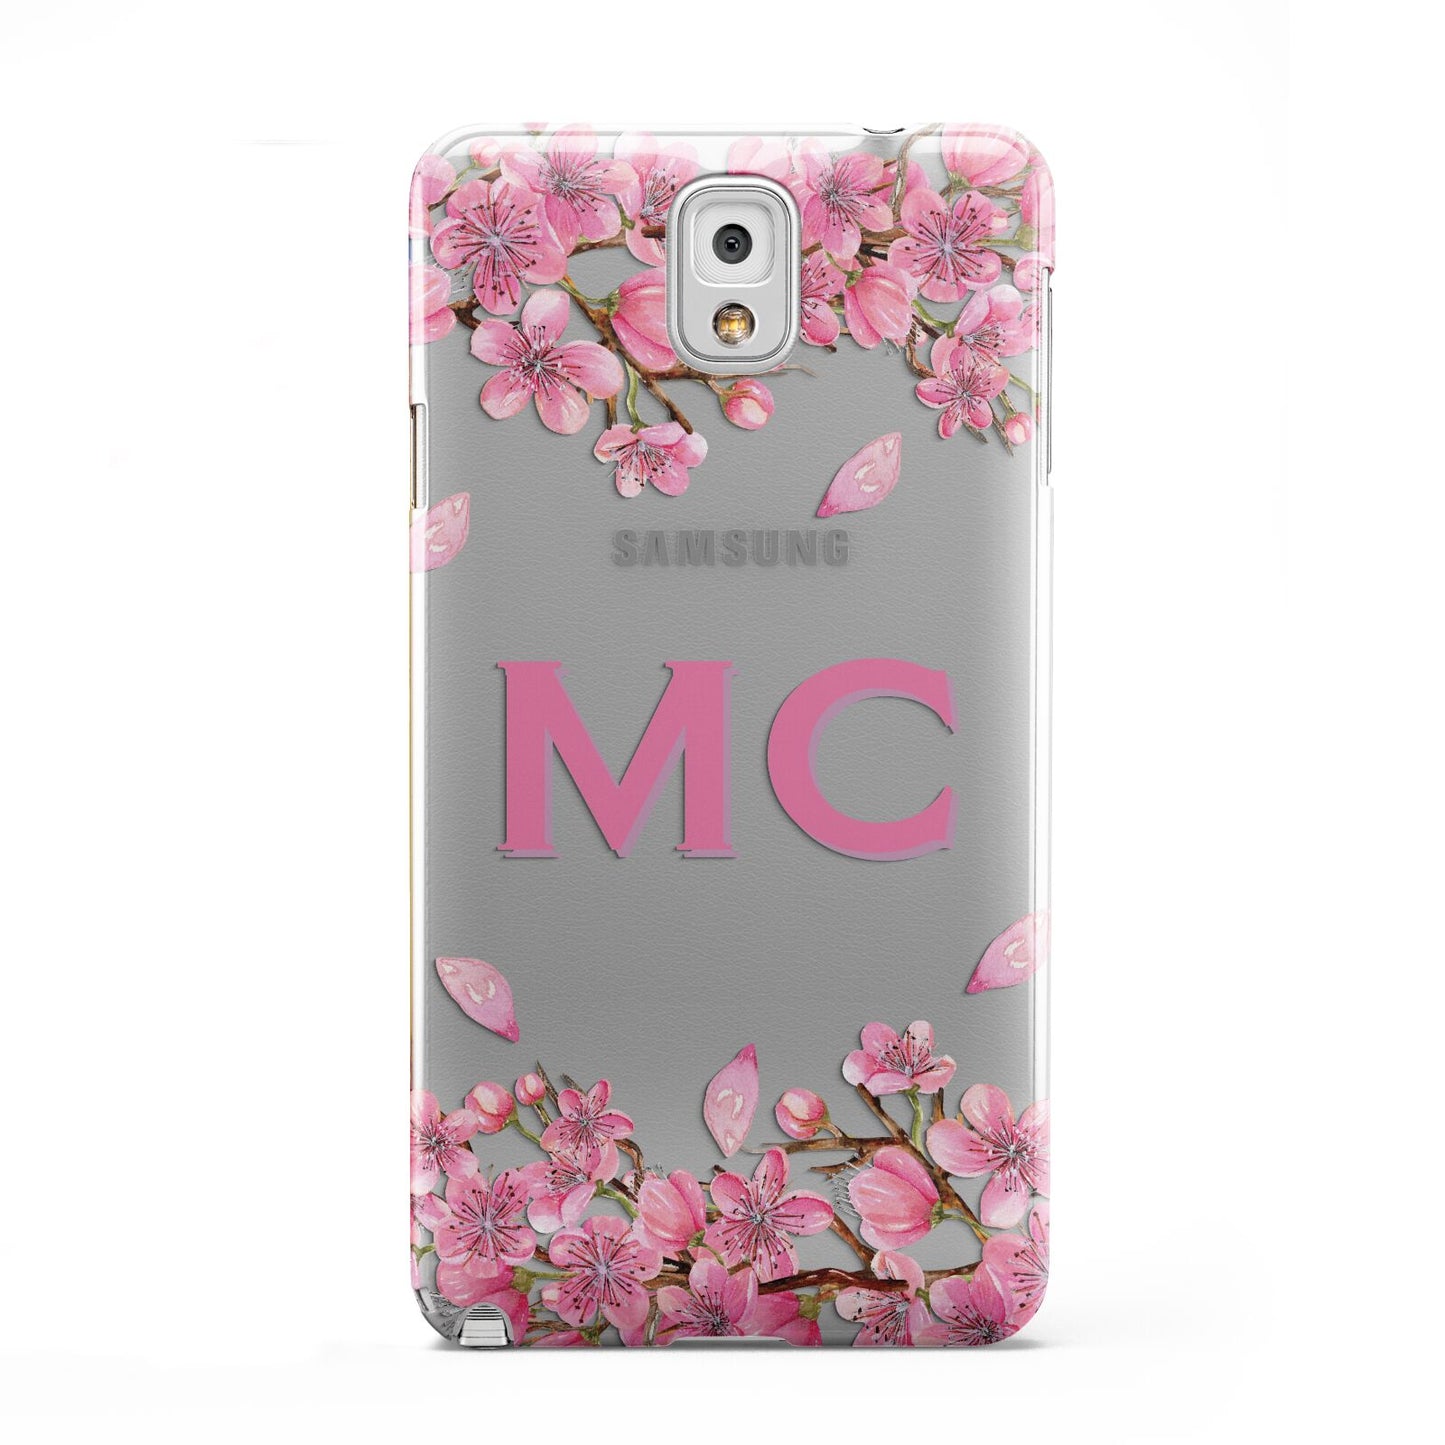 Personalised Vibrant Cherry Blossom Pink Samsung Galaxy Note 3 Case